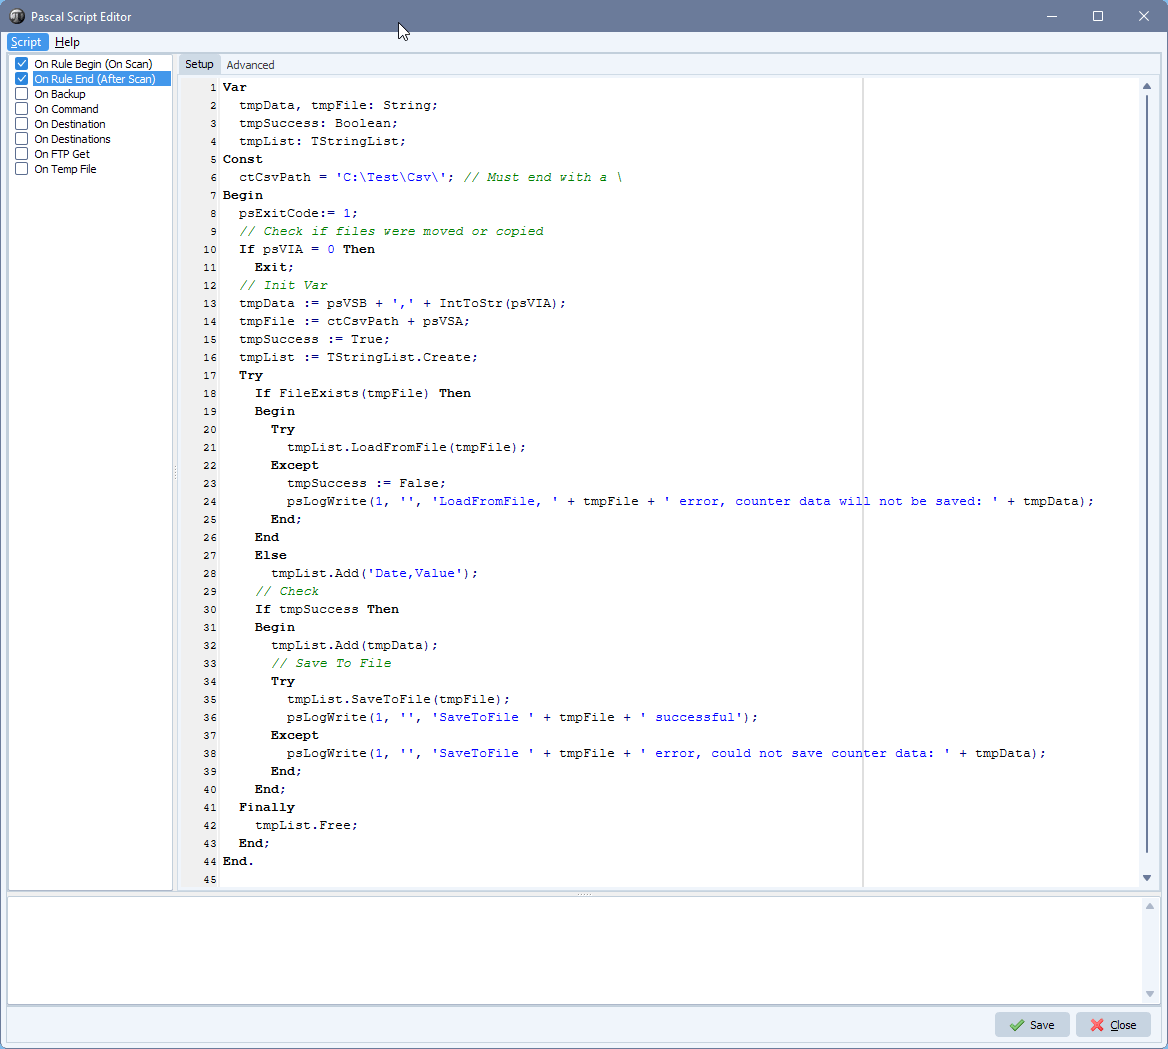 limagito file mover on rule end pascal script